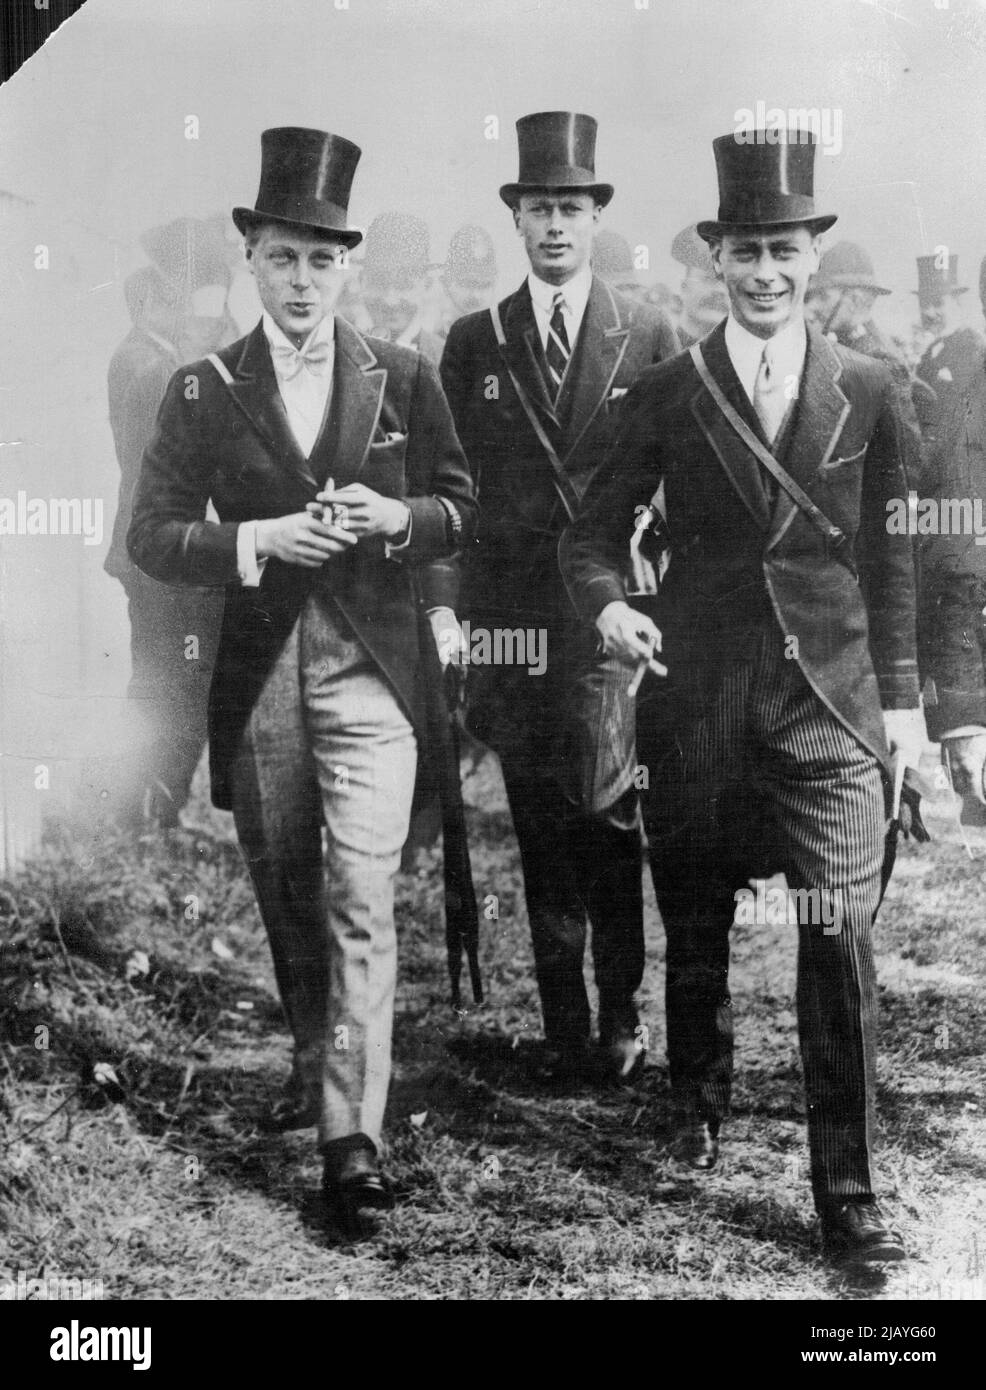 The Duke and Duchess of York Leave Tomorrow: The Duke of York with the Prince of Wales and Prince Henry taken at Epsom. The Duke and Duchess of York leave Portsmouth on H.M.S. Renown for their Australian tour, tomorrow (Thursday). April 28, 1937. Stock Photo